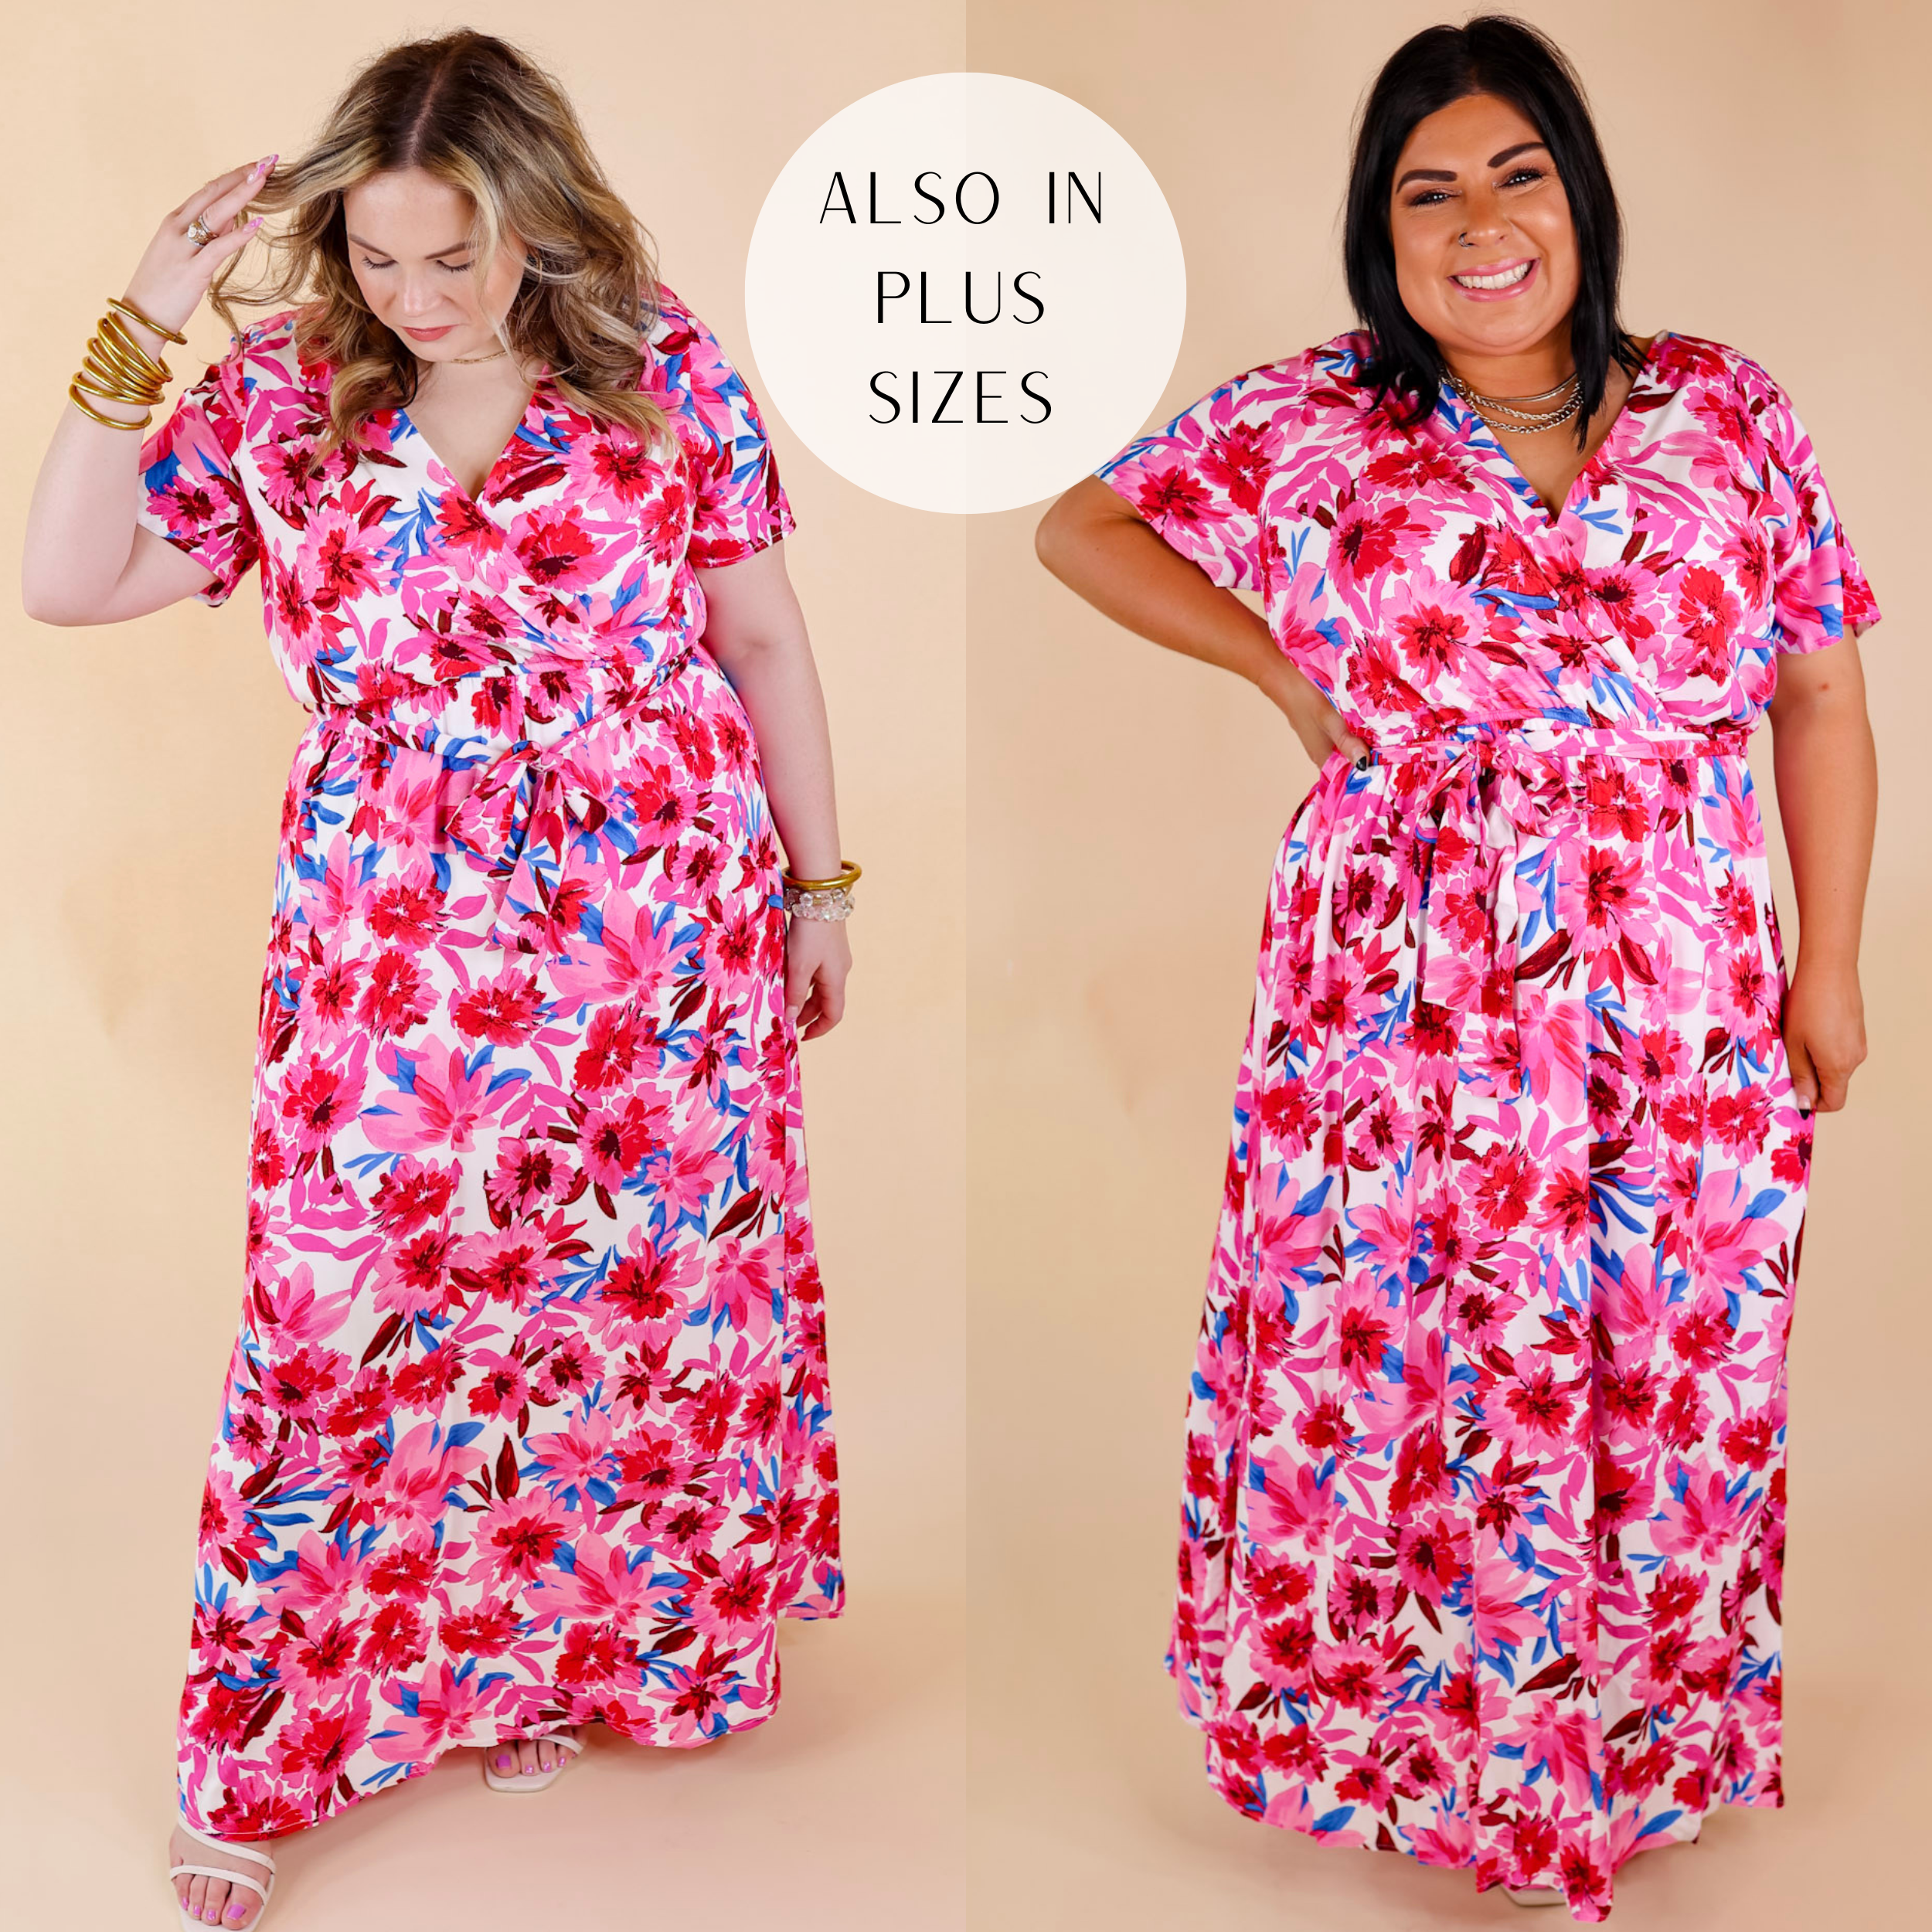 Models are wearing a pink floral maxi dress with short sleeves, a v neckline, and a waist tie. Size large model has it paired with white strappy heels and gold jewelry. Plus size model has it paired with white heels and silver jewelry.